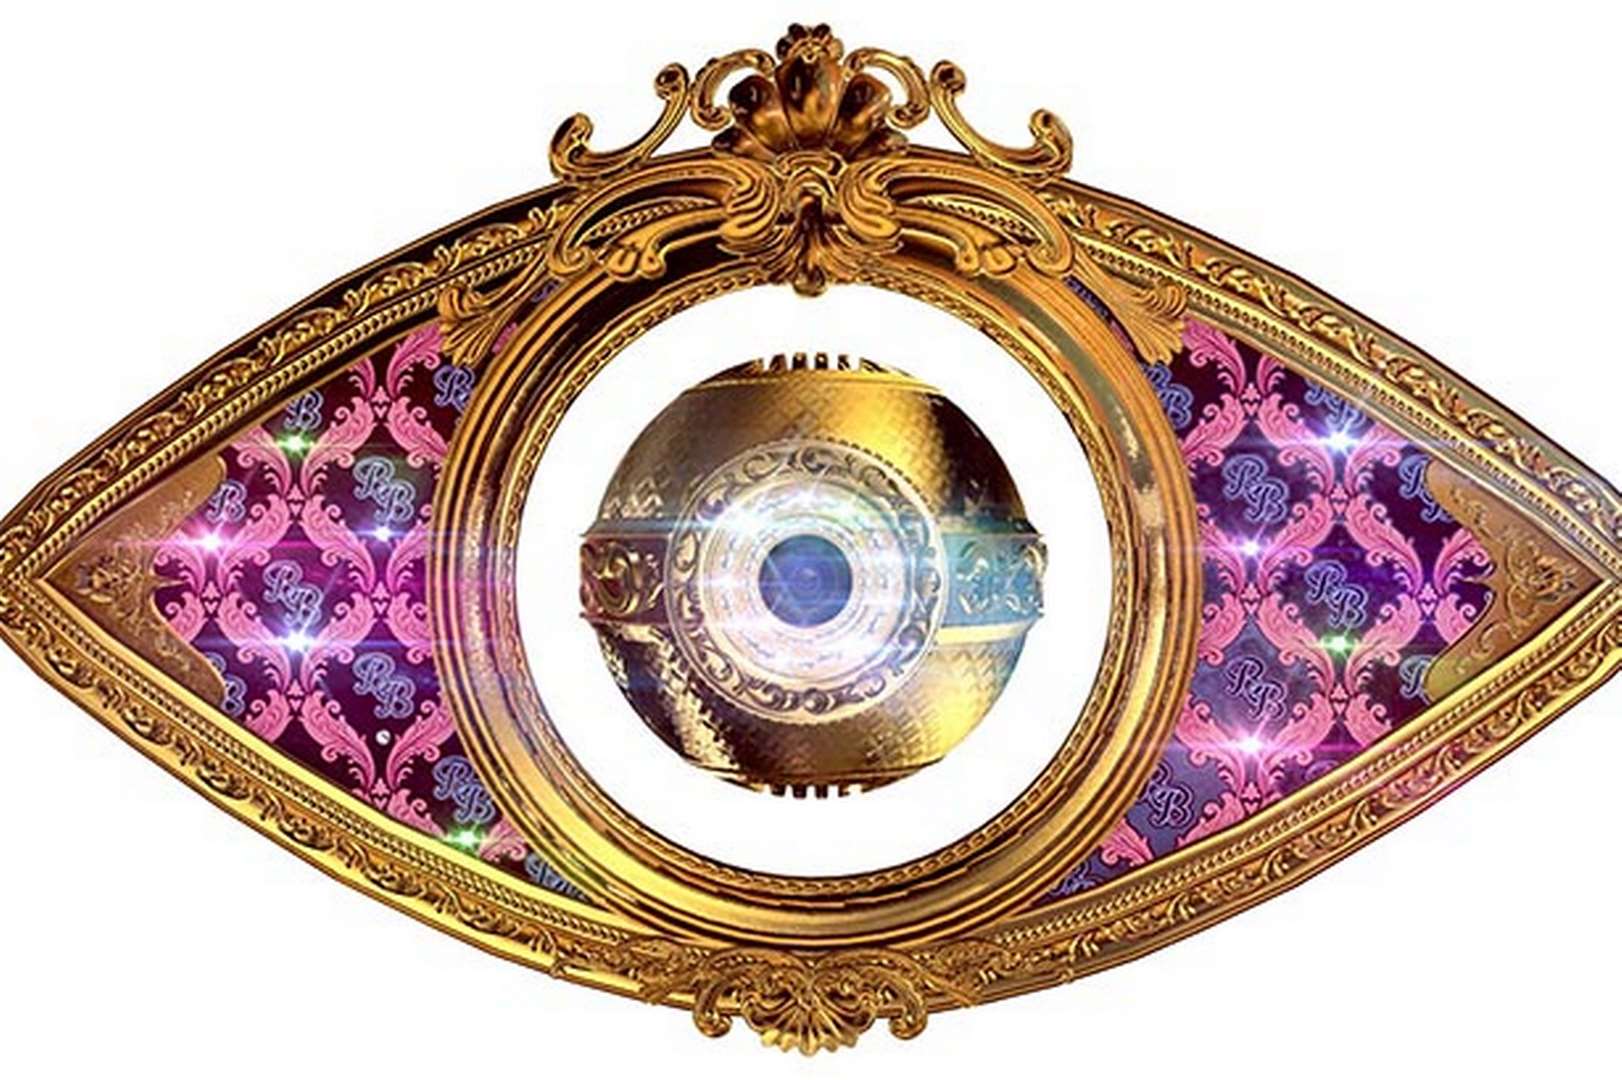 The Big Brother logo